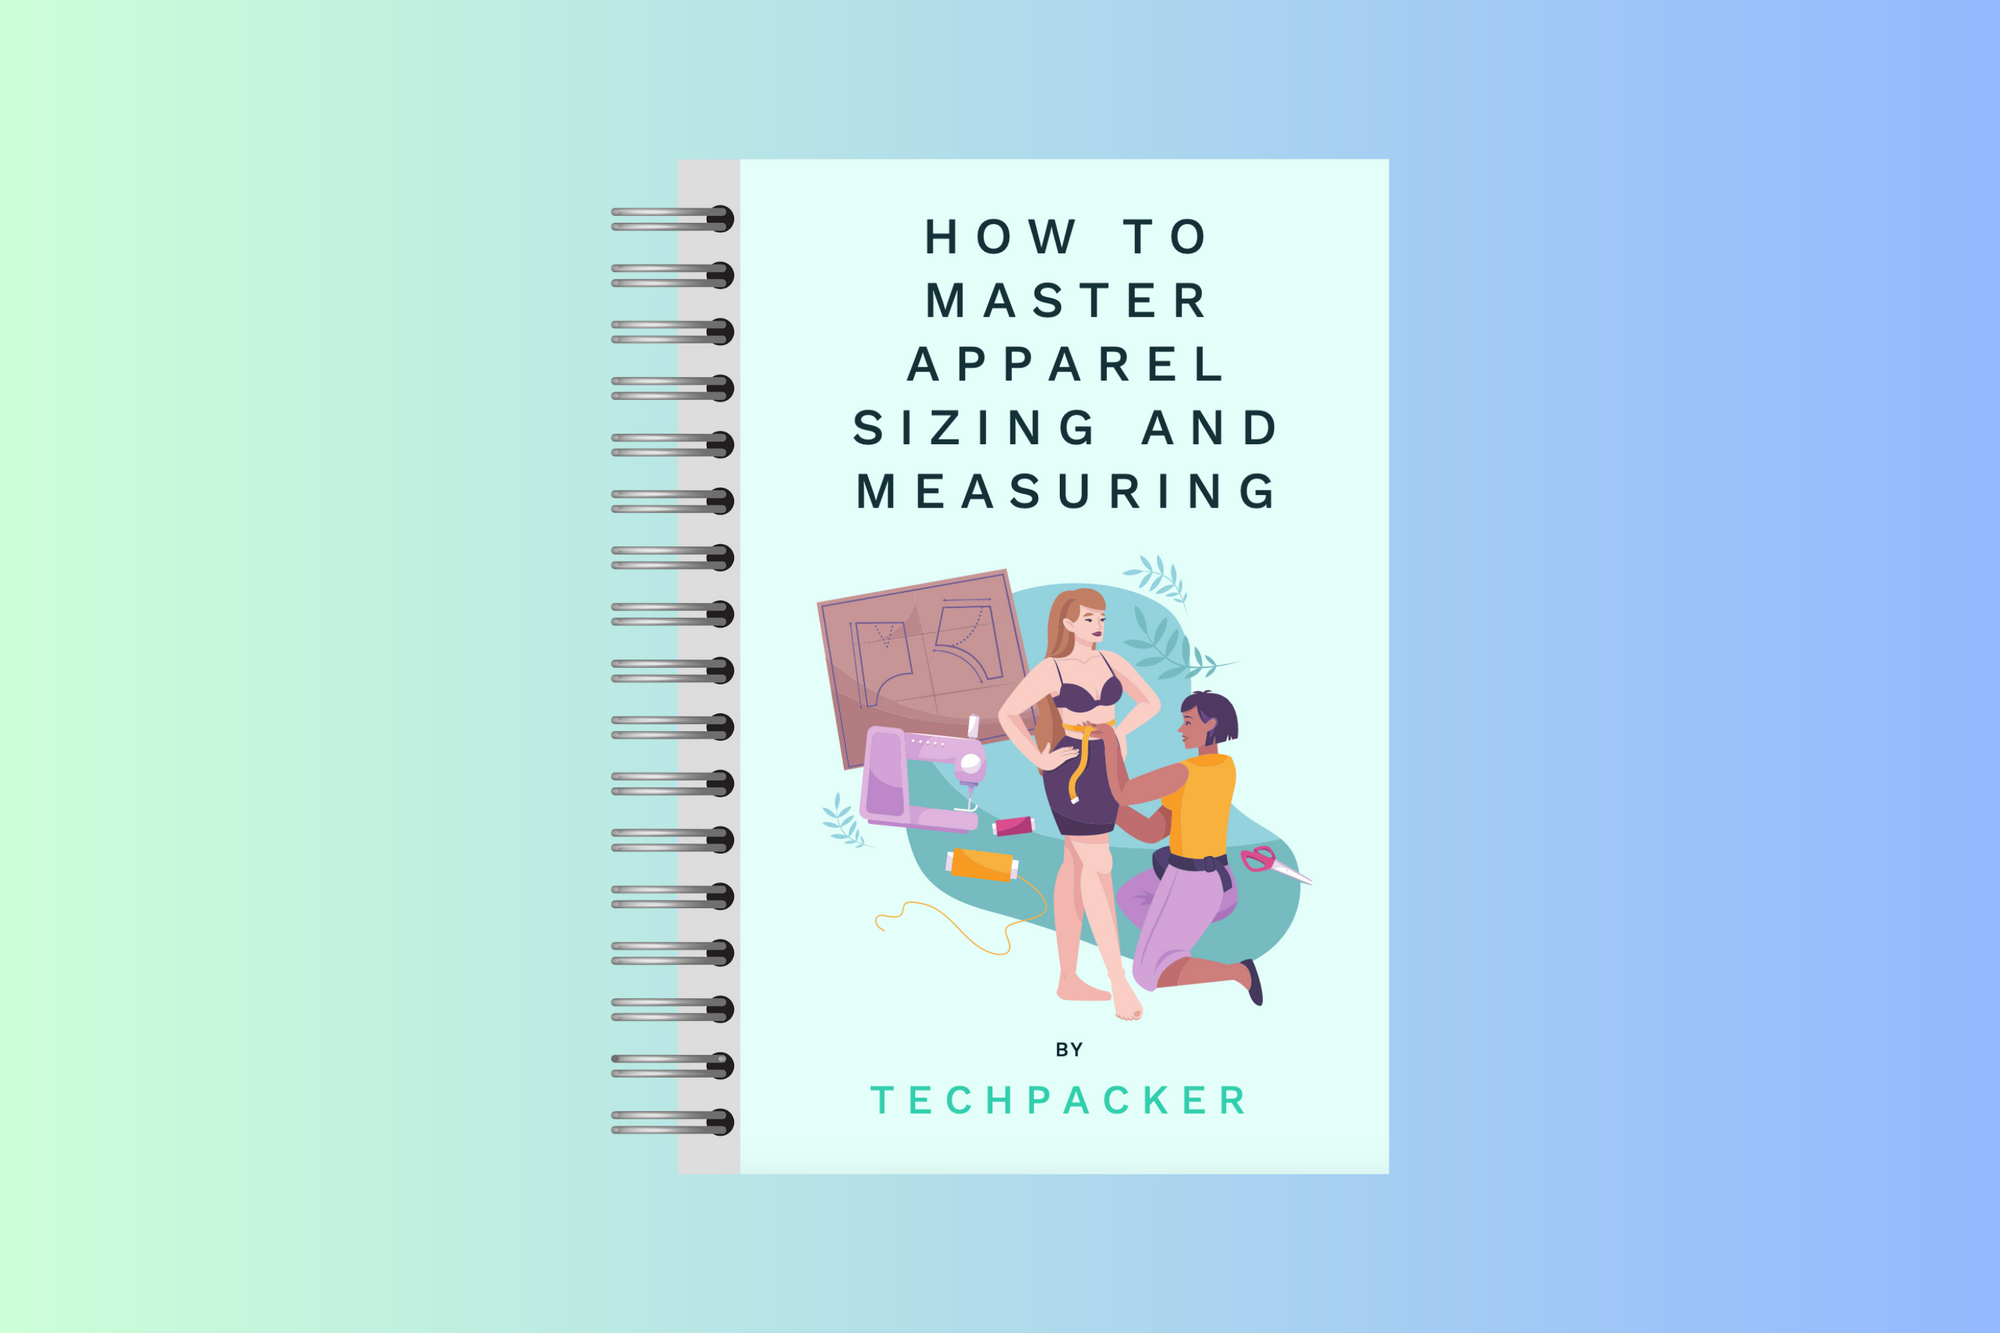 Ebook: How to master apparel sizing and measuring